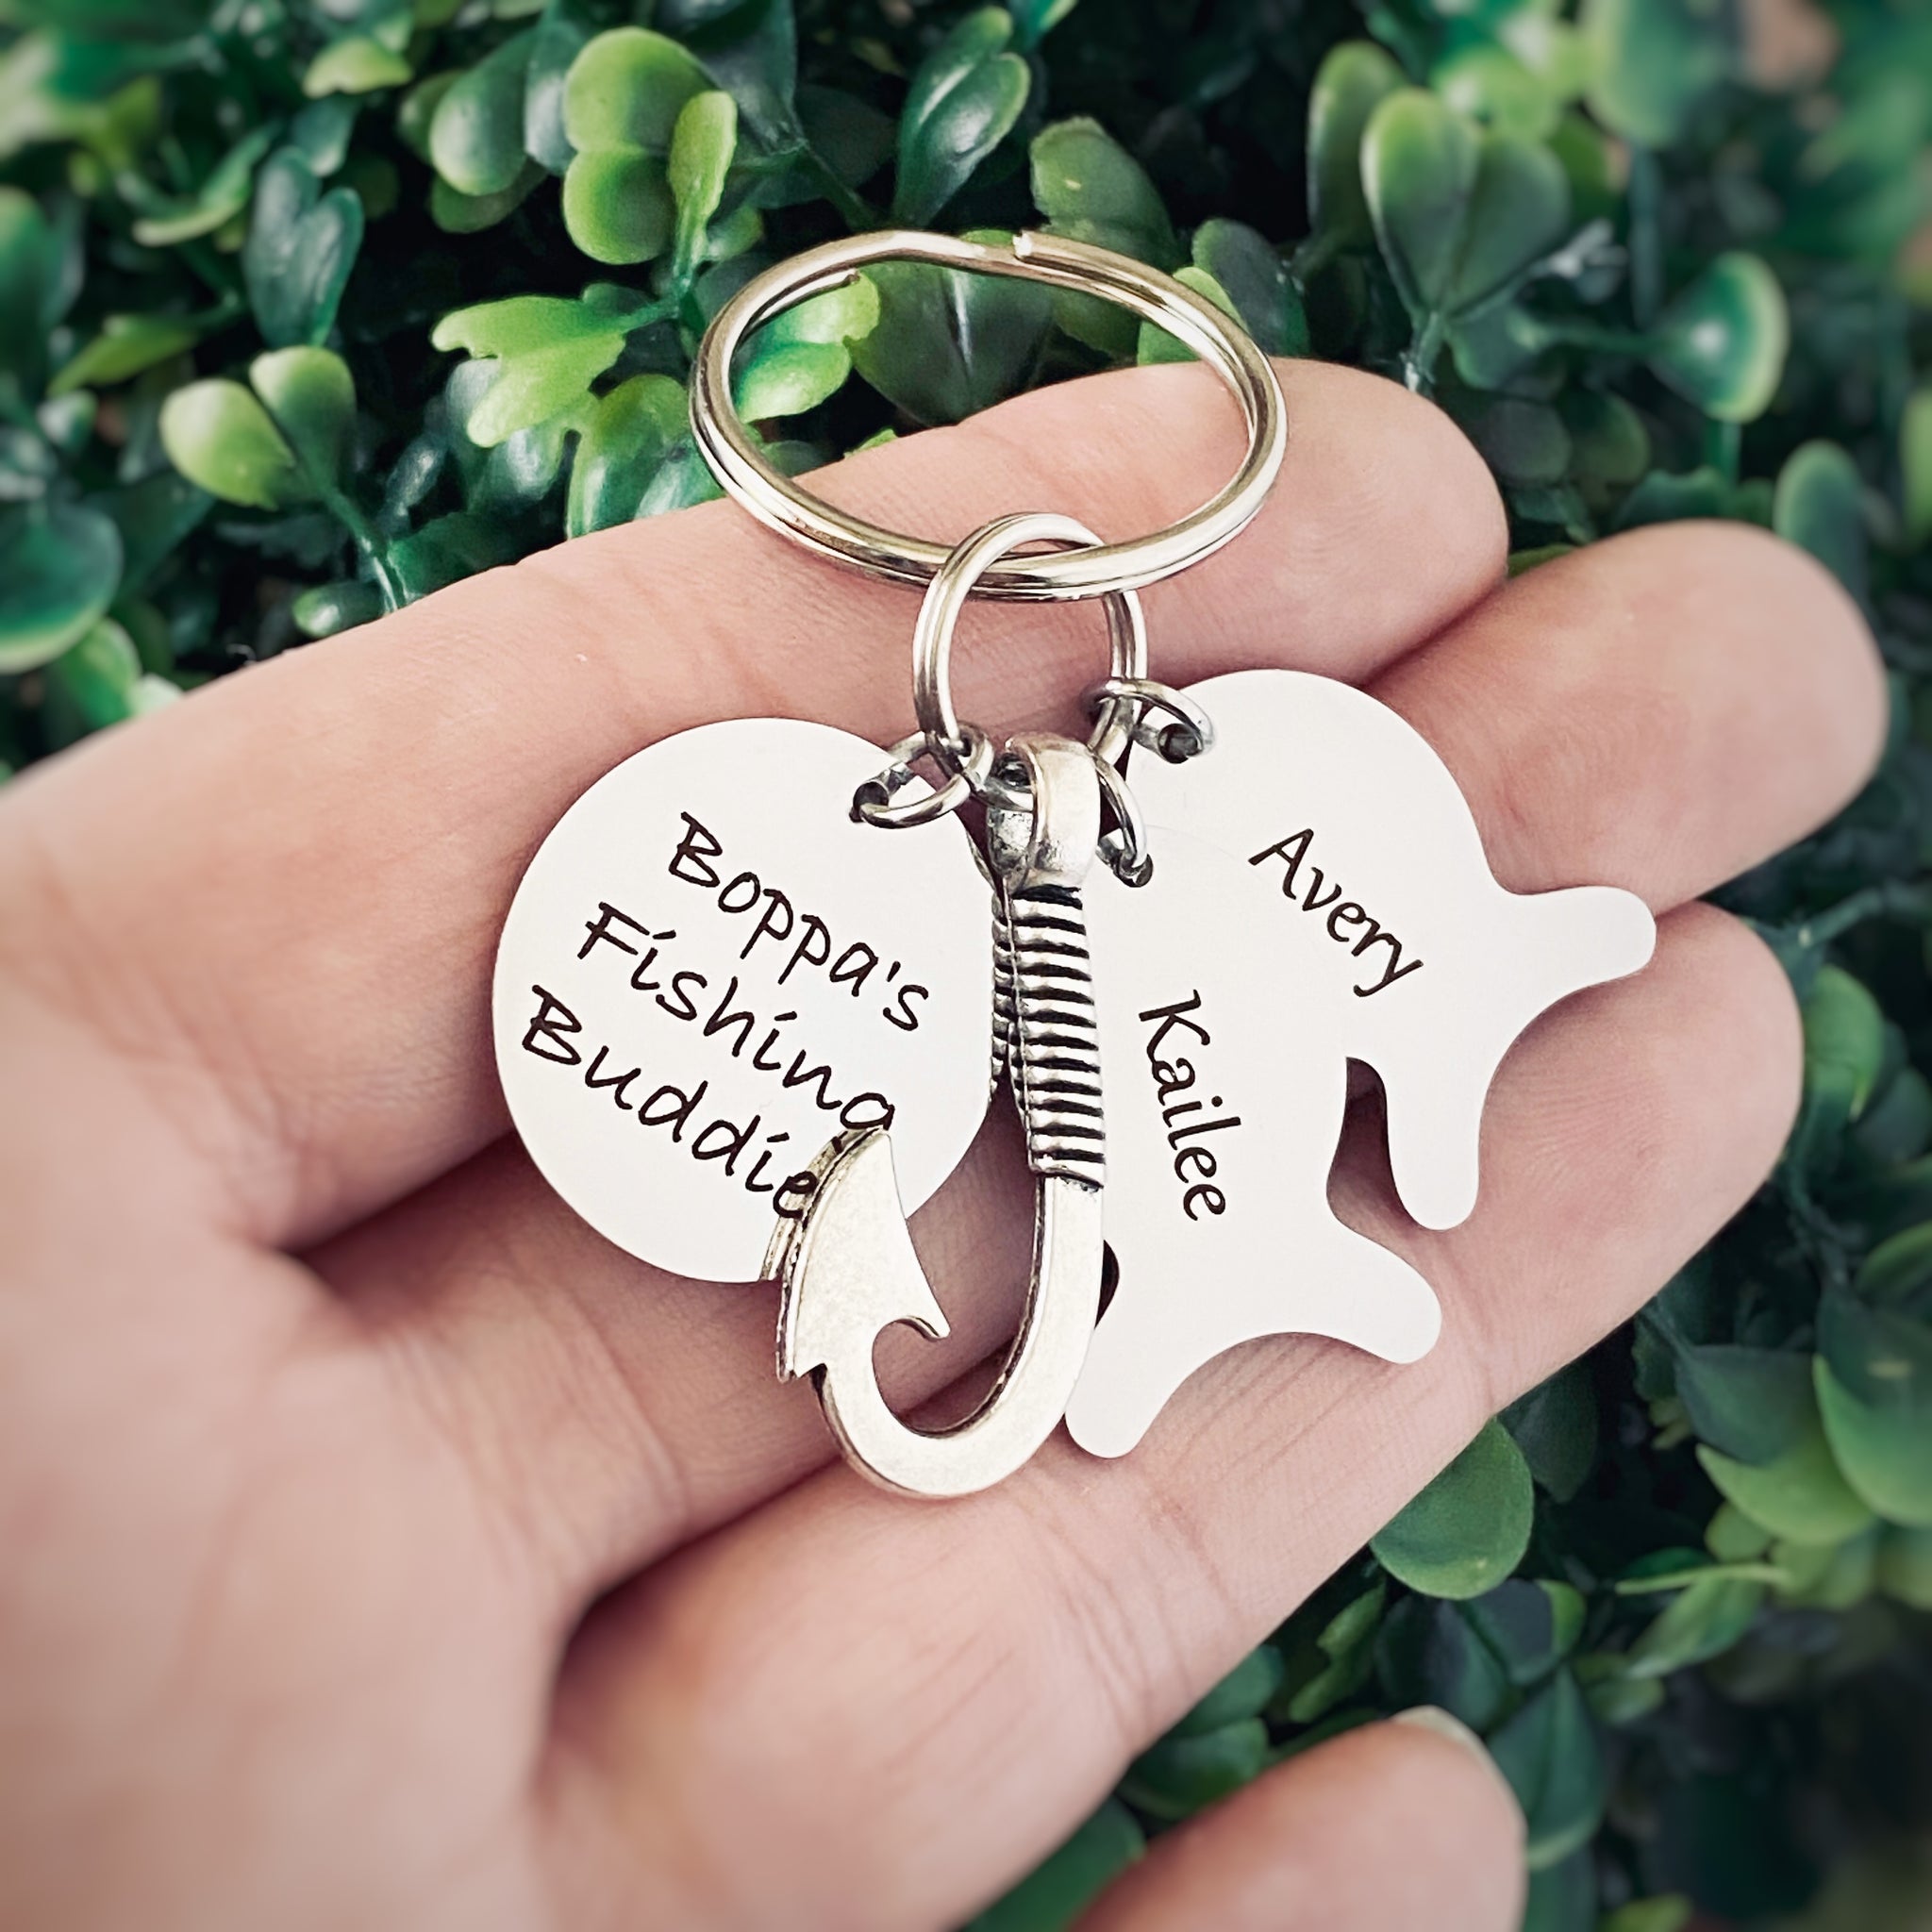 Fishing Keychain for Dad with Kids Personalized Fish Name Tags